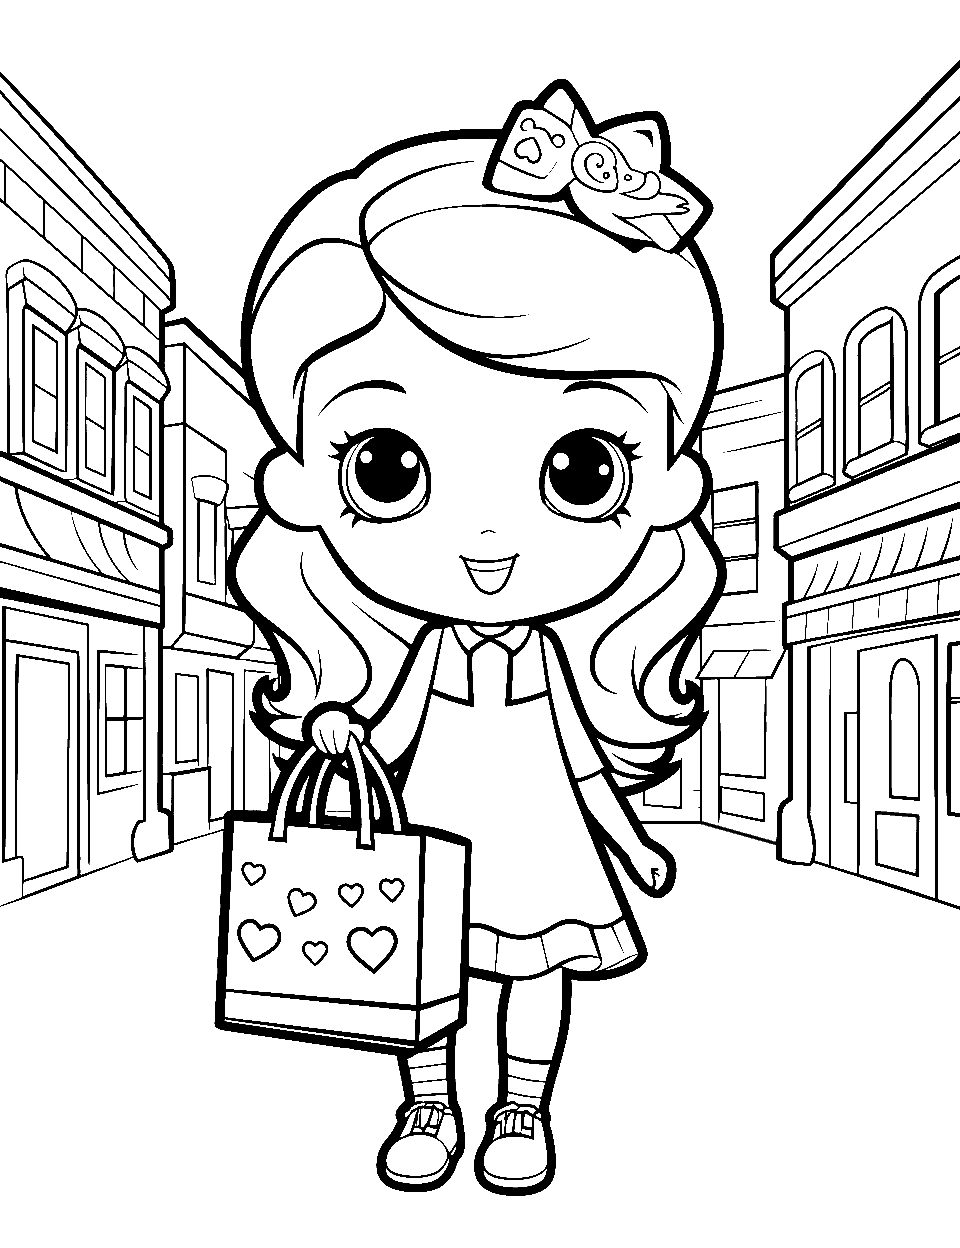 Girl Shopkin's Day Out Coloring Page - A girl Shopkin with a shopping bag, strolling in the city.